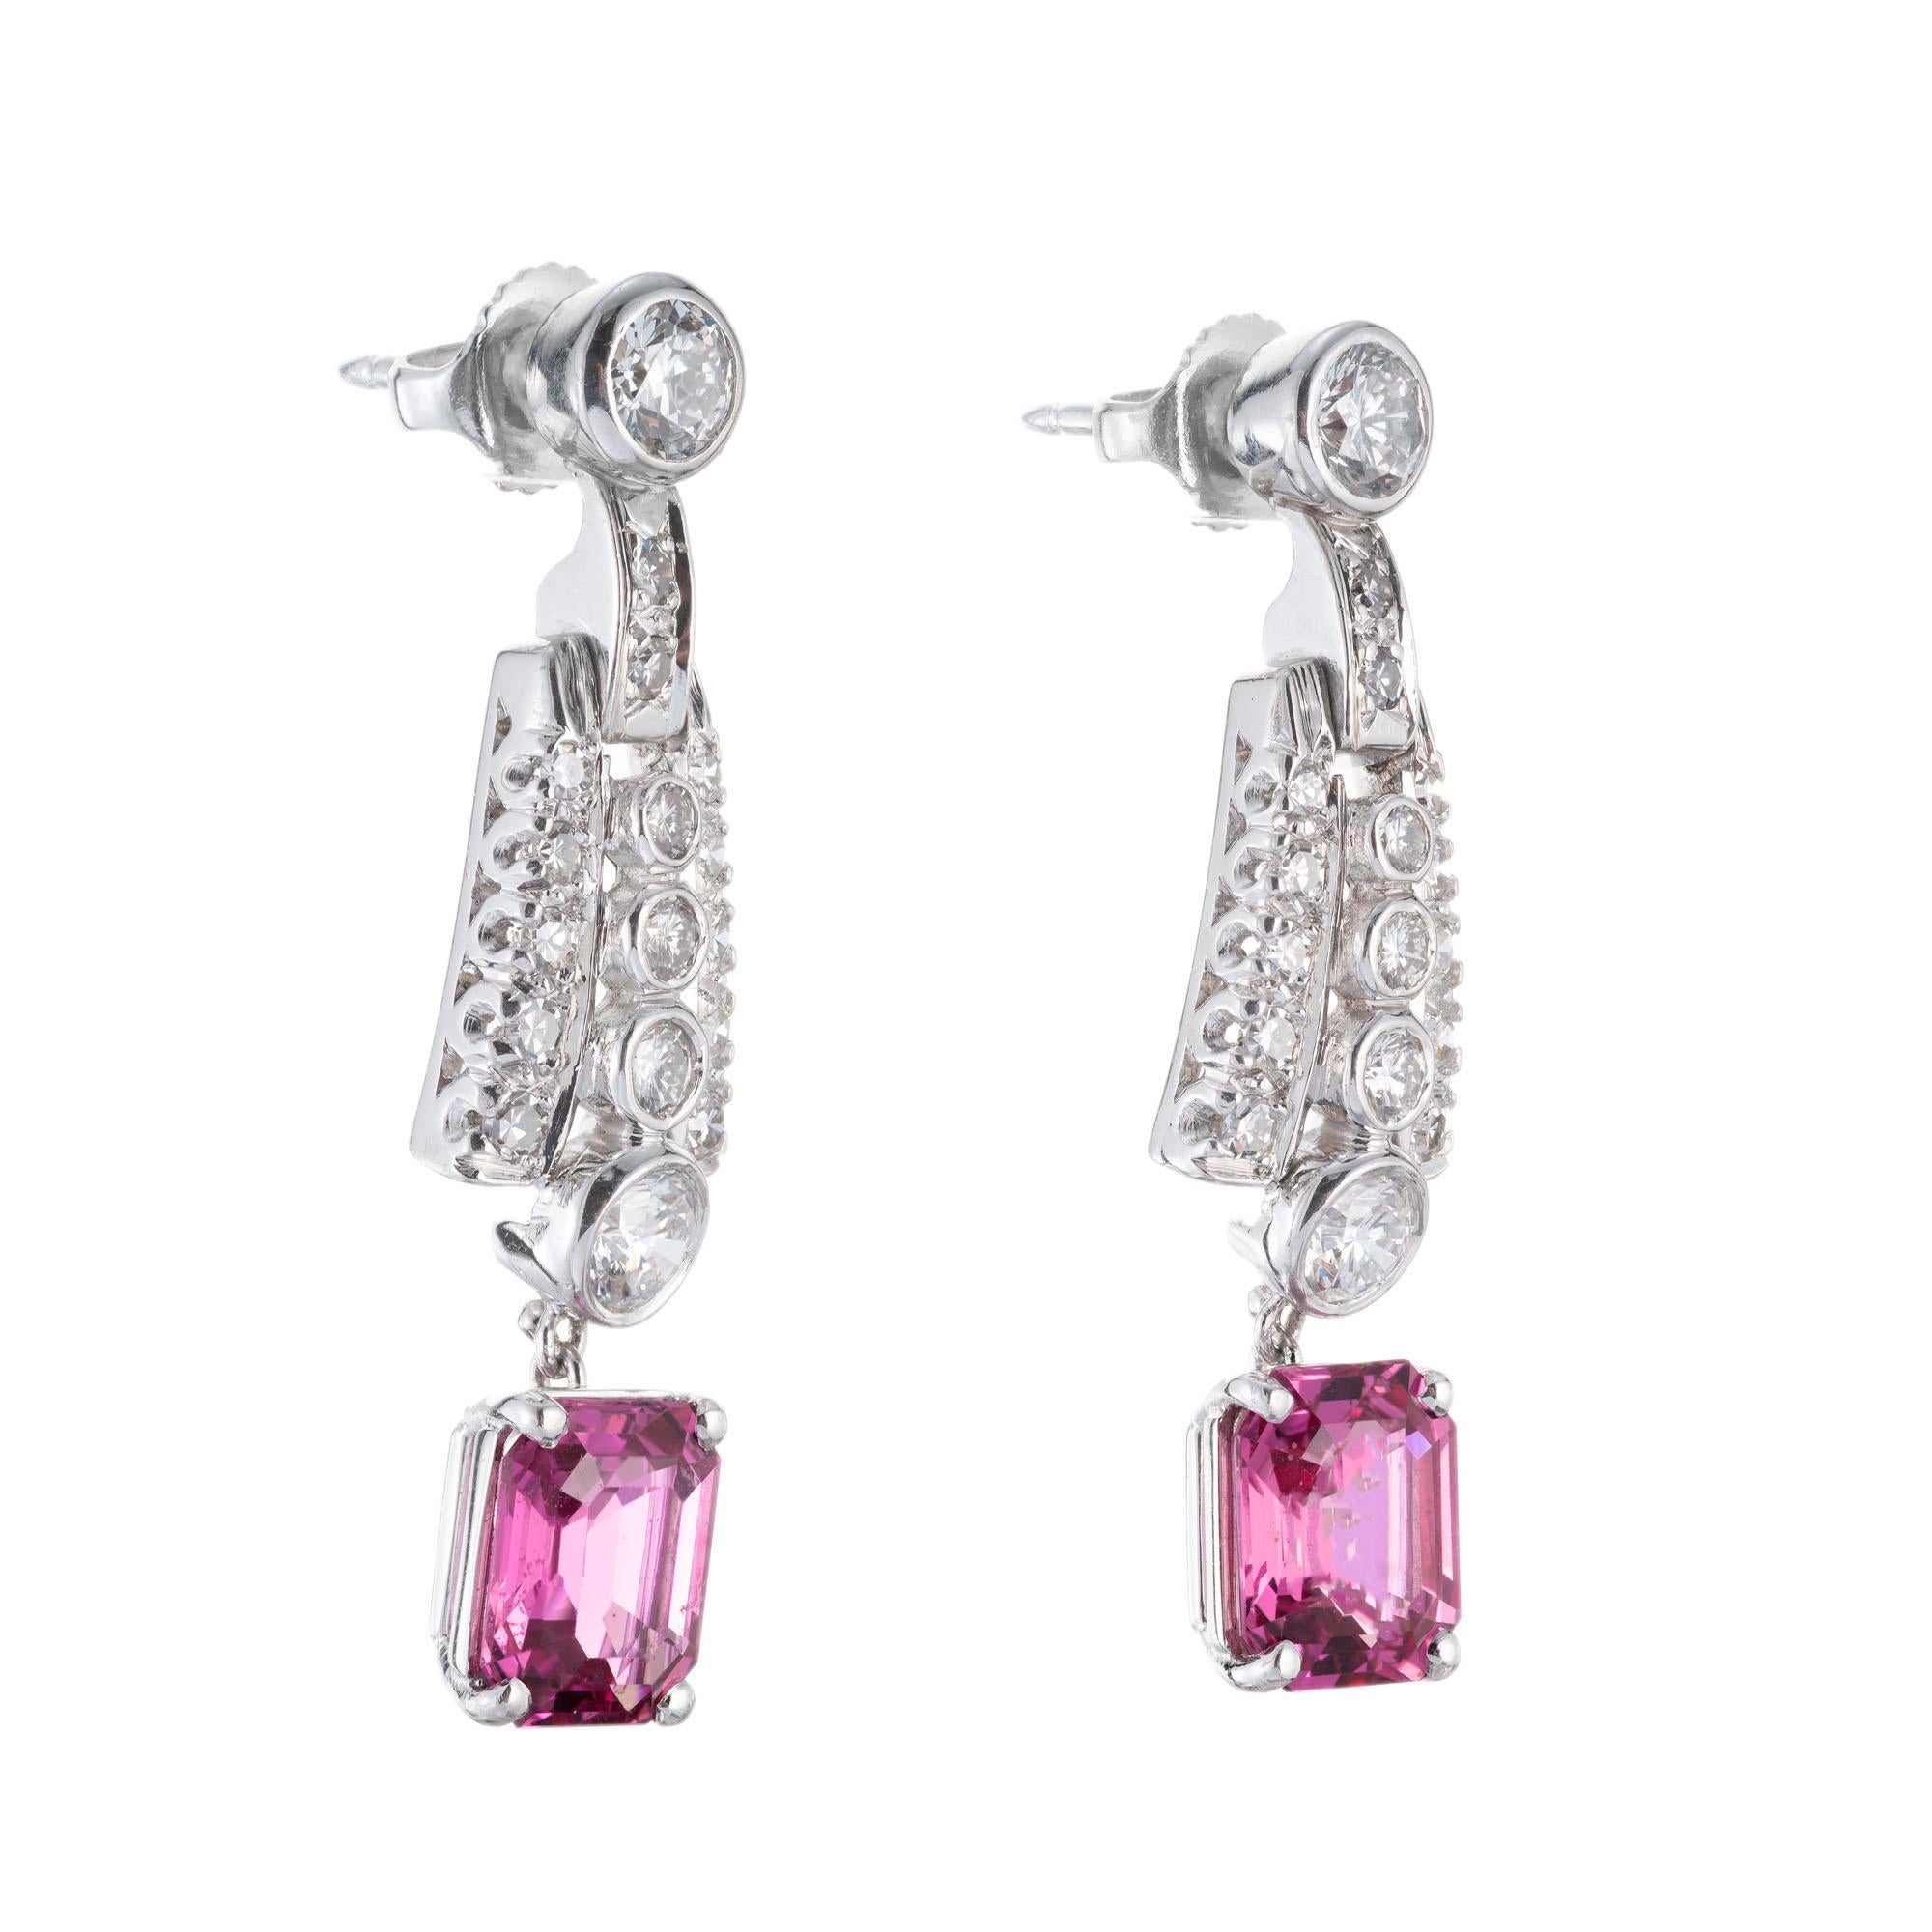  Sapphire and diamond earrings. 36 round full cut diamond hinged tops with 2 octagonal cut pink sapphire dangles. GIA certified.  Circa 1940-1950.

1 octagonal pink sapphire 2.00ct GIA certified simple heat only. GIA certificate # 1152704105
1